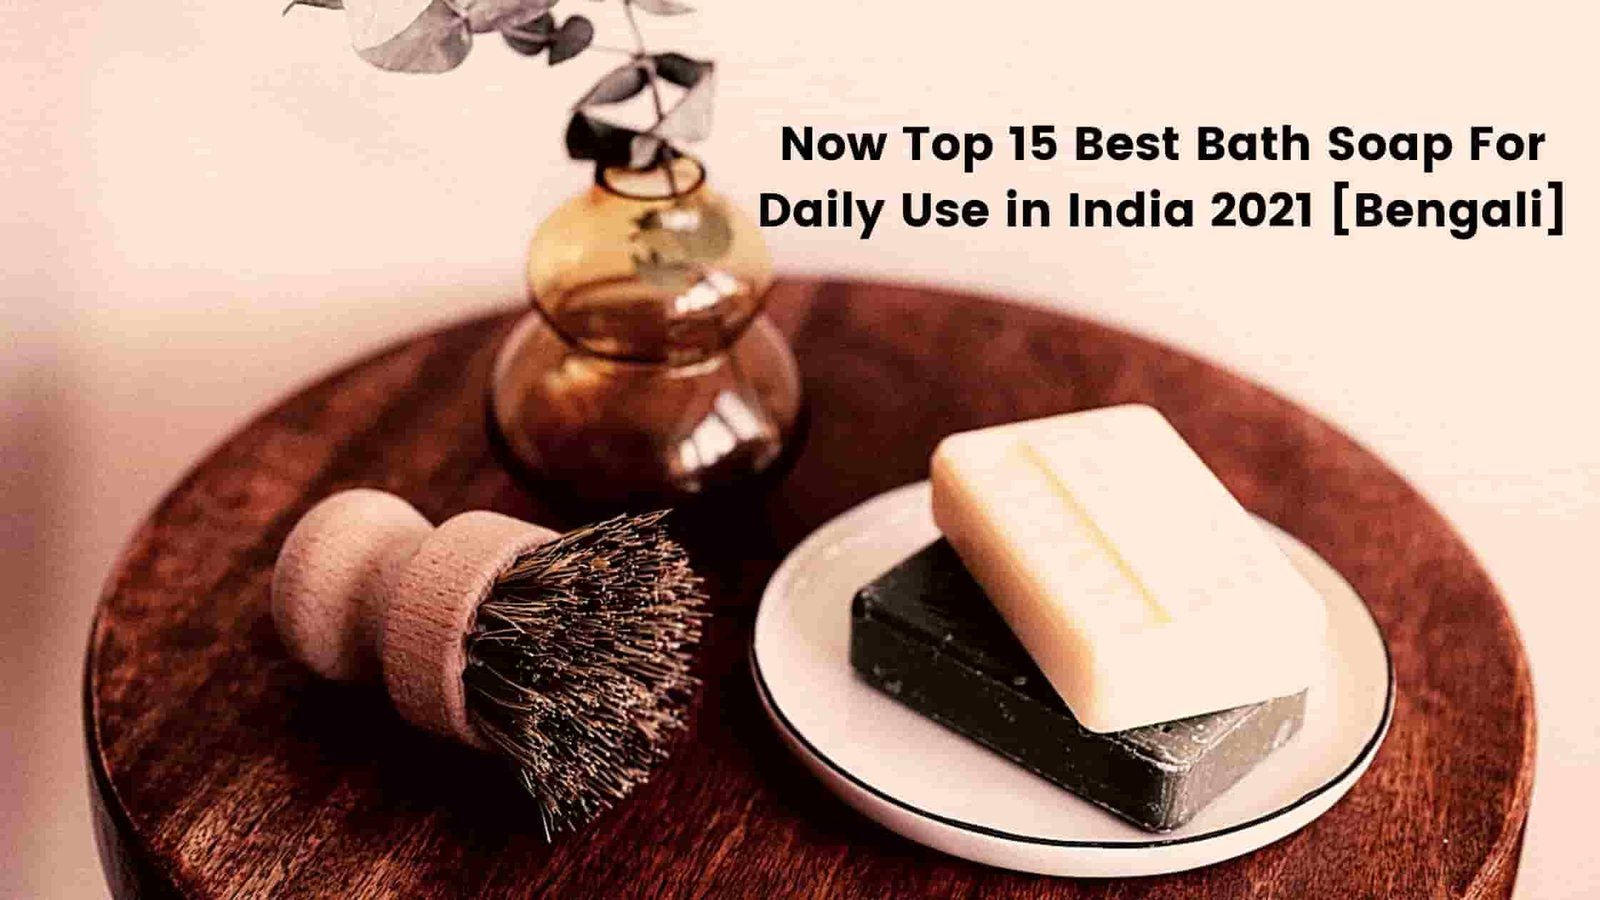 Now Top 15 Best Bath Soap For Daily Use in India 2021 [Bengali]